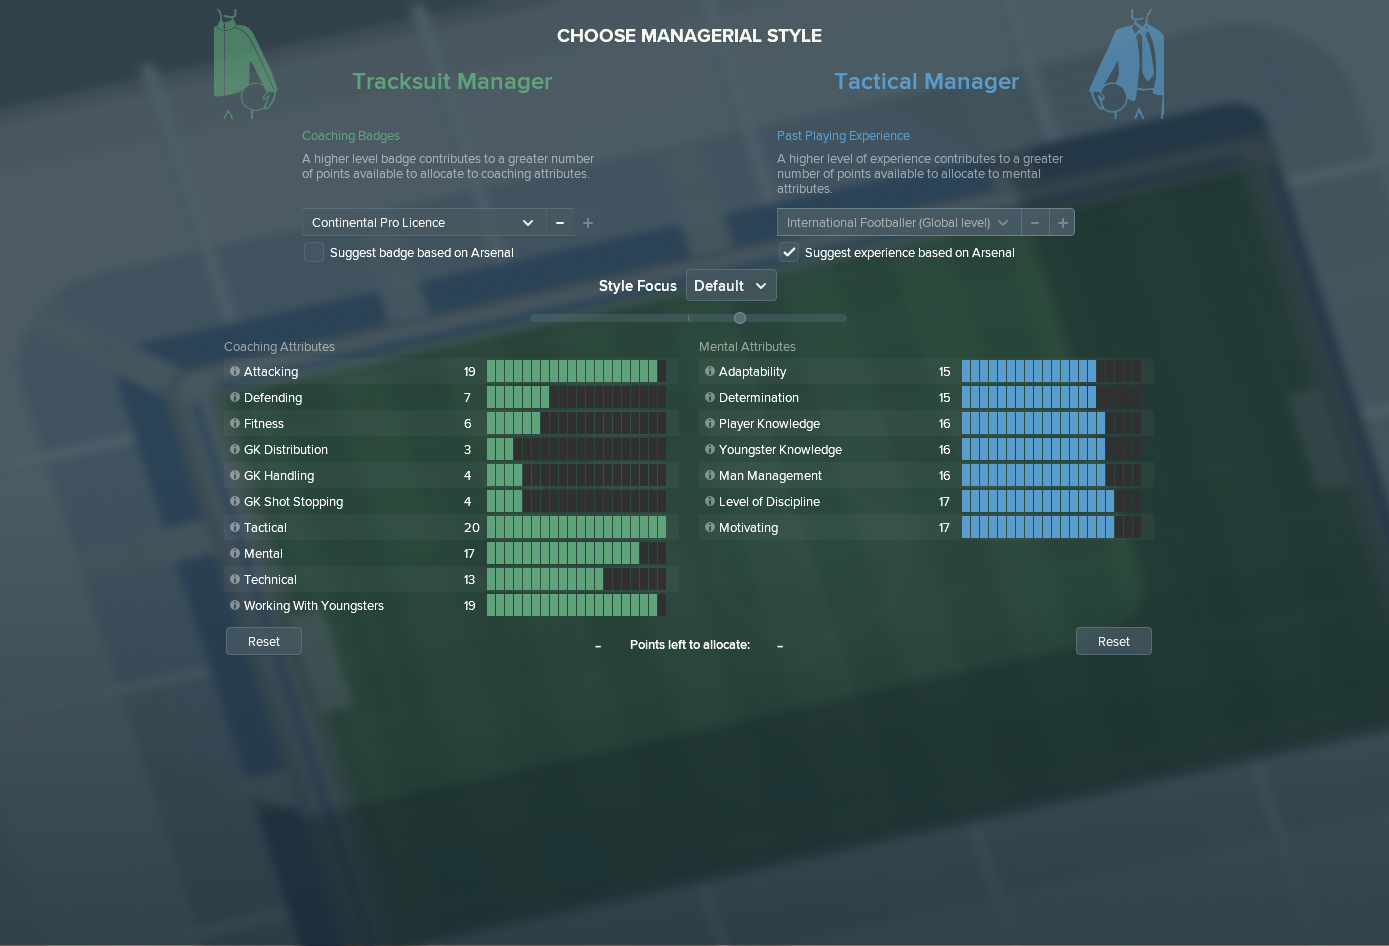 Football Manager 2022 Mobile - Beginners Guide - Getting Started